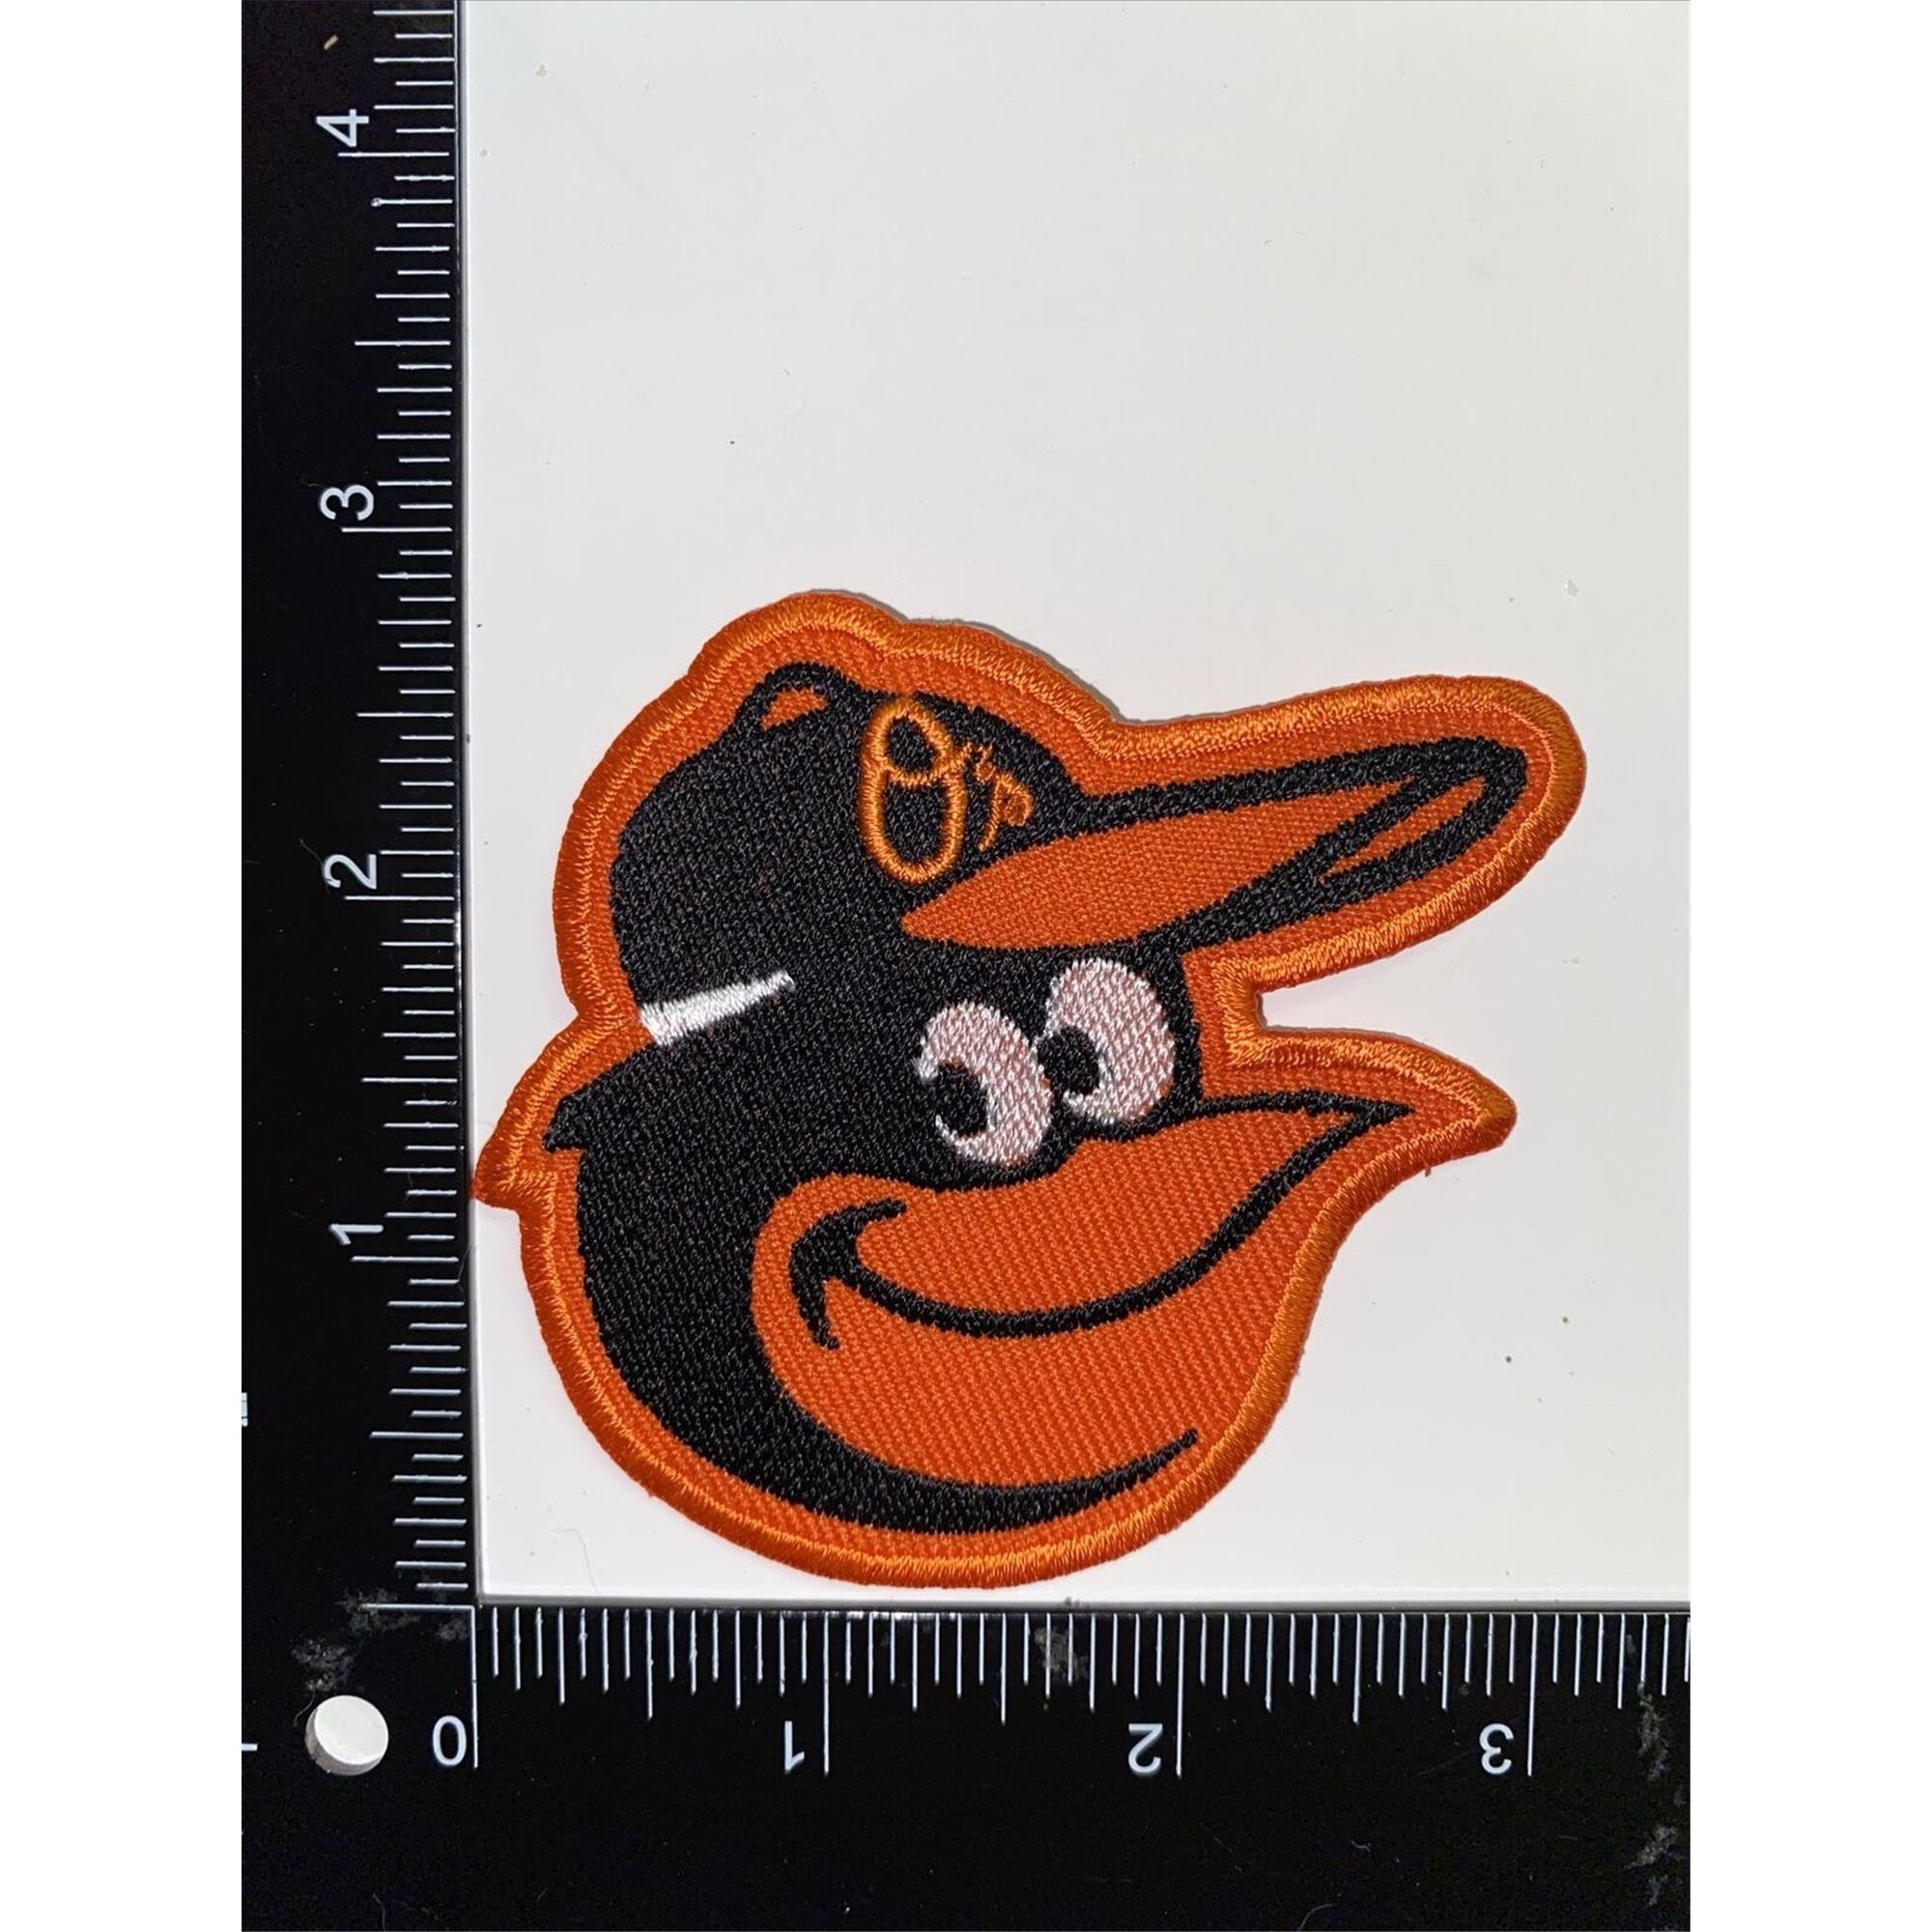 BALTIMORE ORIOLES vintage MLB iron on patch 2.5” X 2.5”